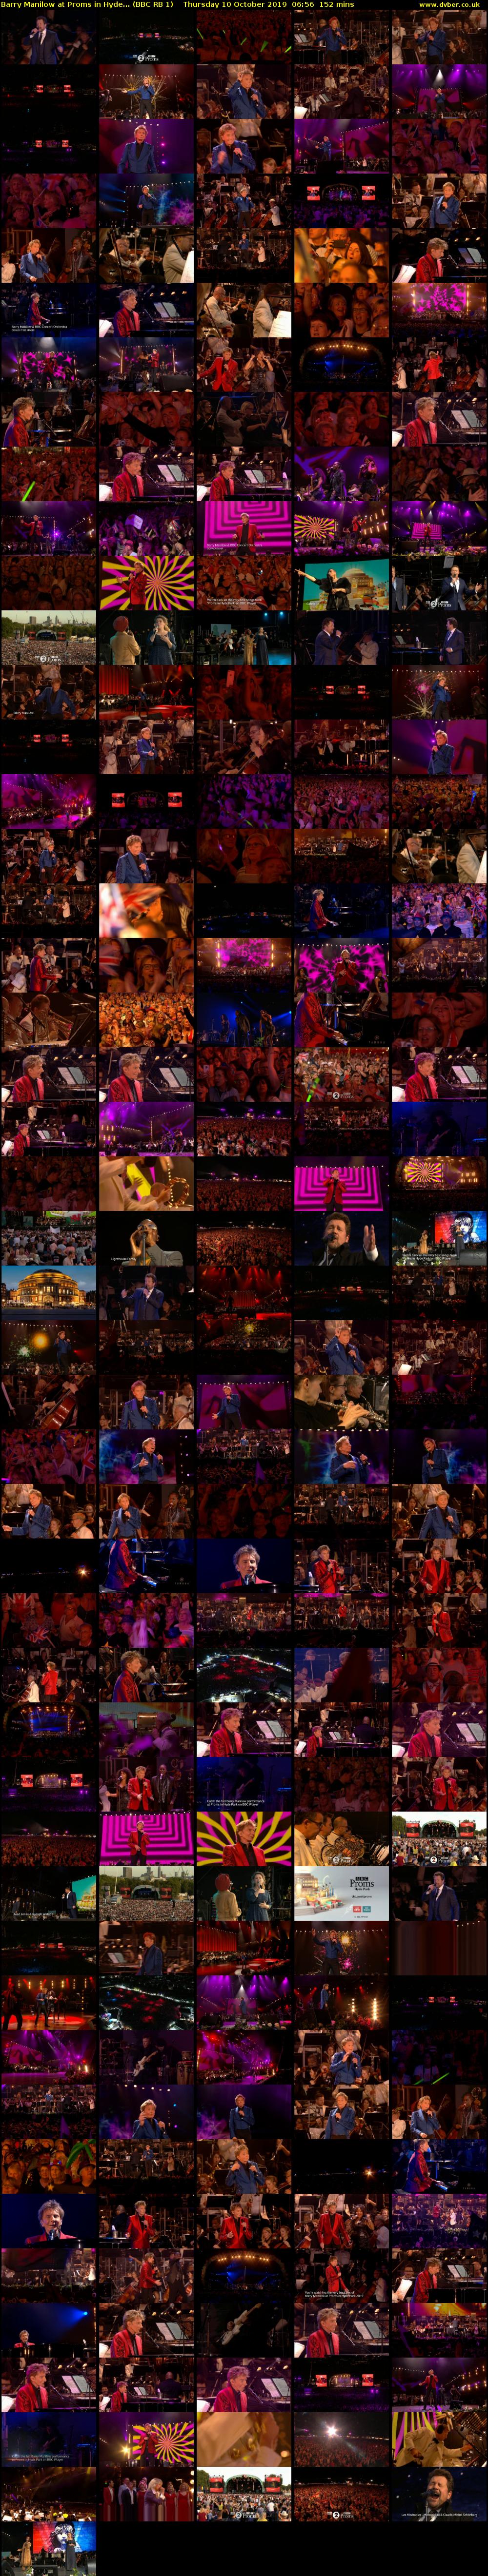 Barry Manilow at Proms in Hyde... (BBC RB 1) Thursday 10 October 2019 06:56 - 09:28